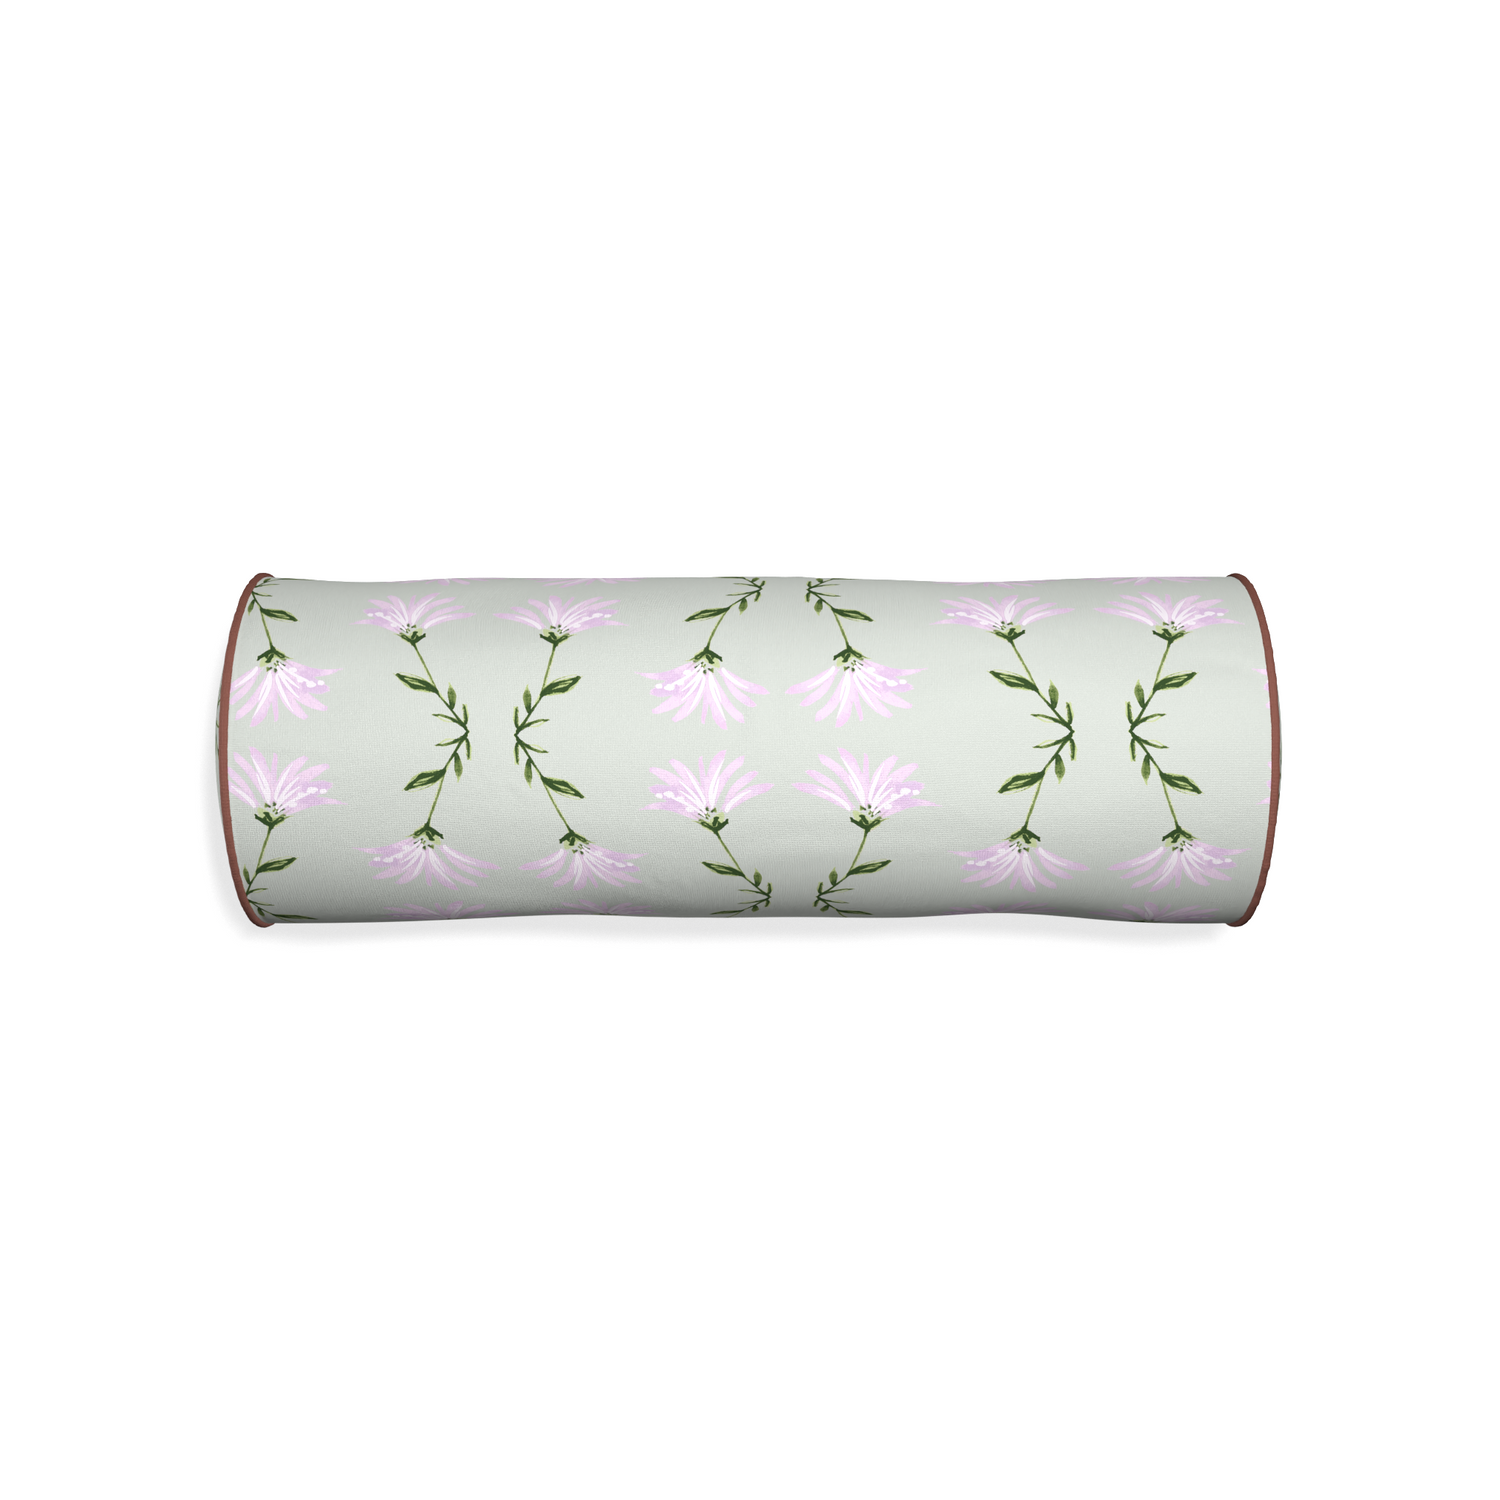 Bolster marina sage custom pillow with w piping on white background